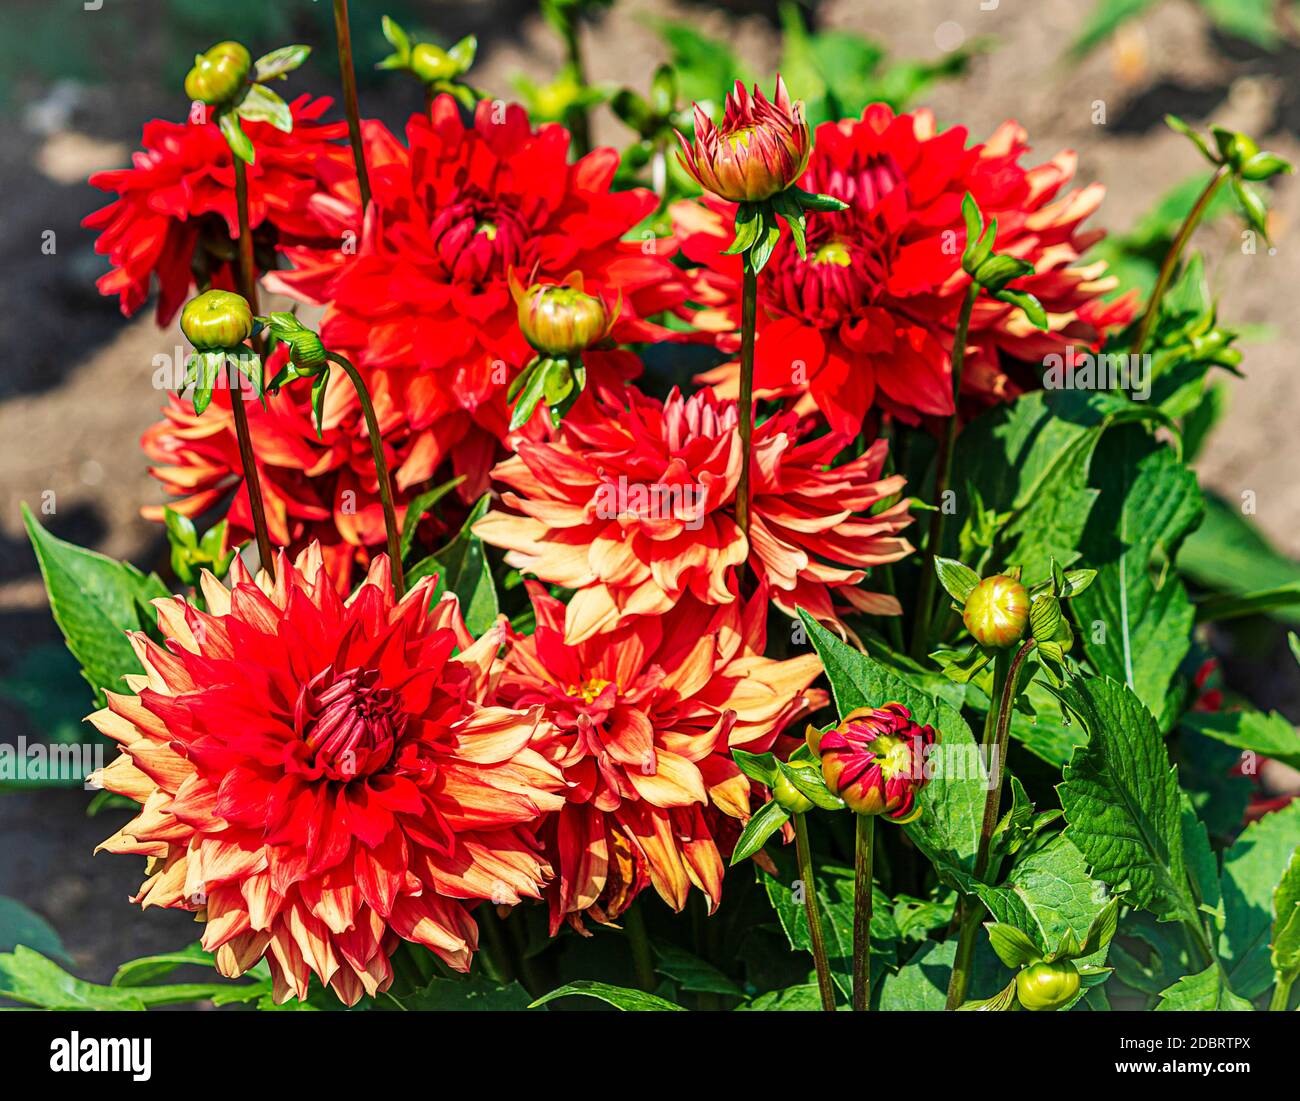 Red dahlia flowering plants with buds growing in dahlia garden in the cathedral city of Fulda, Germany Stock Photo